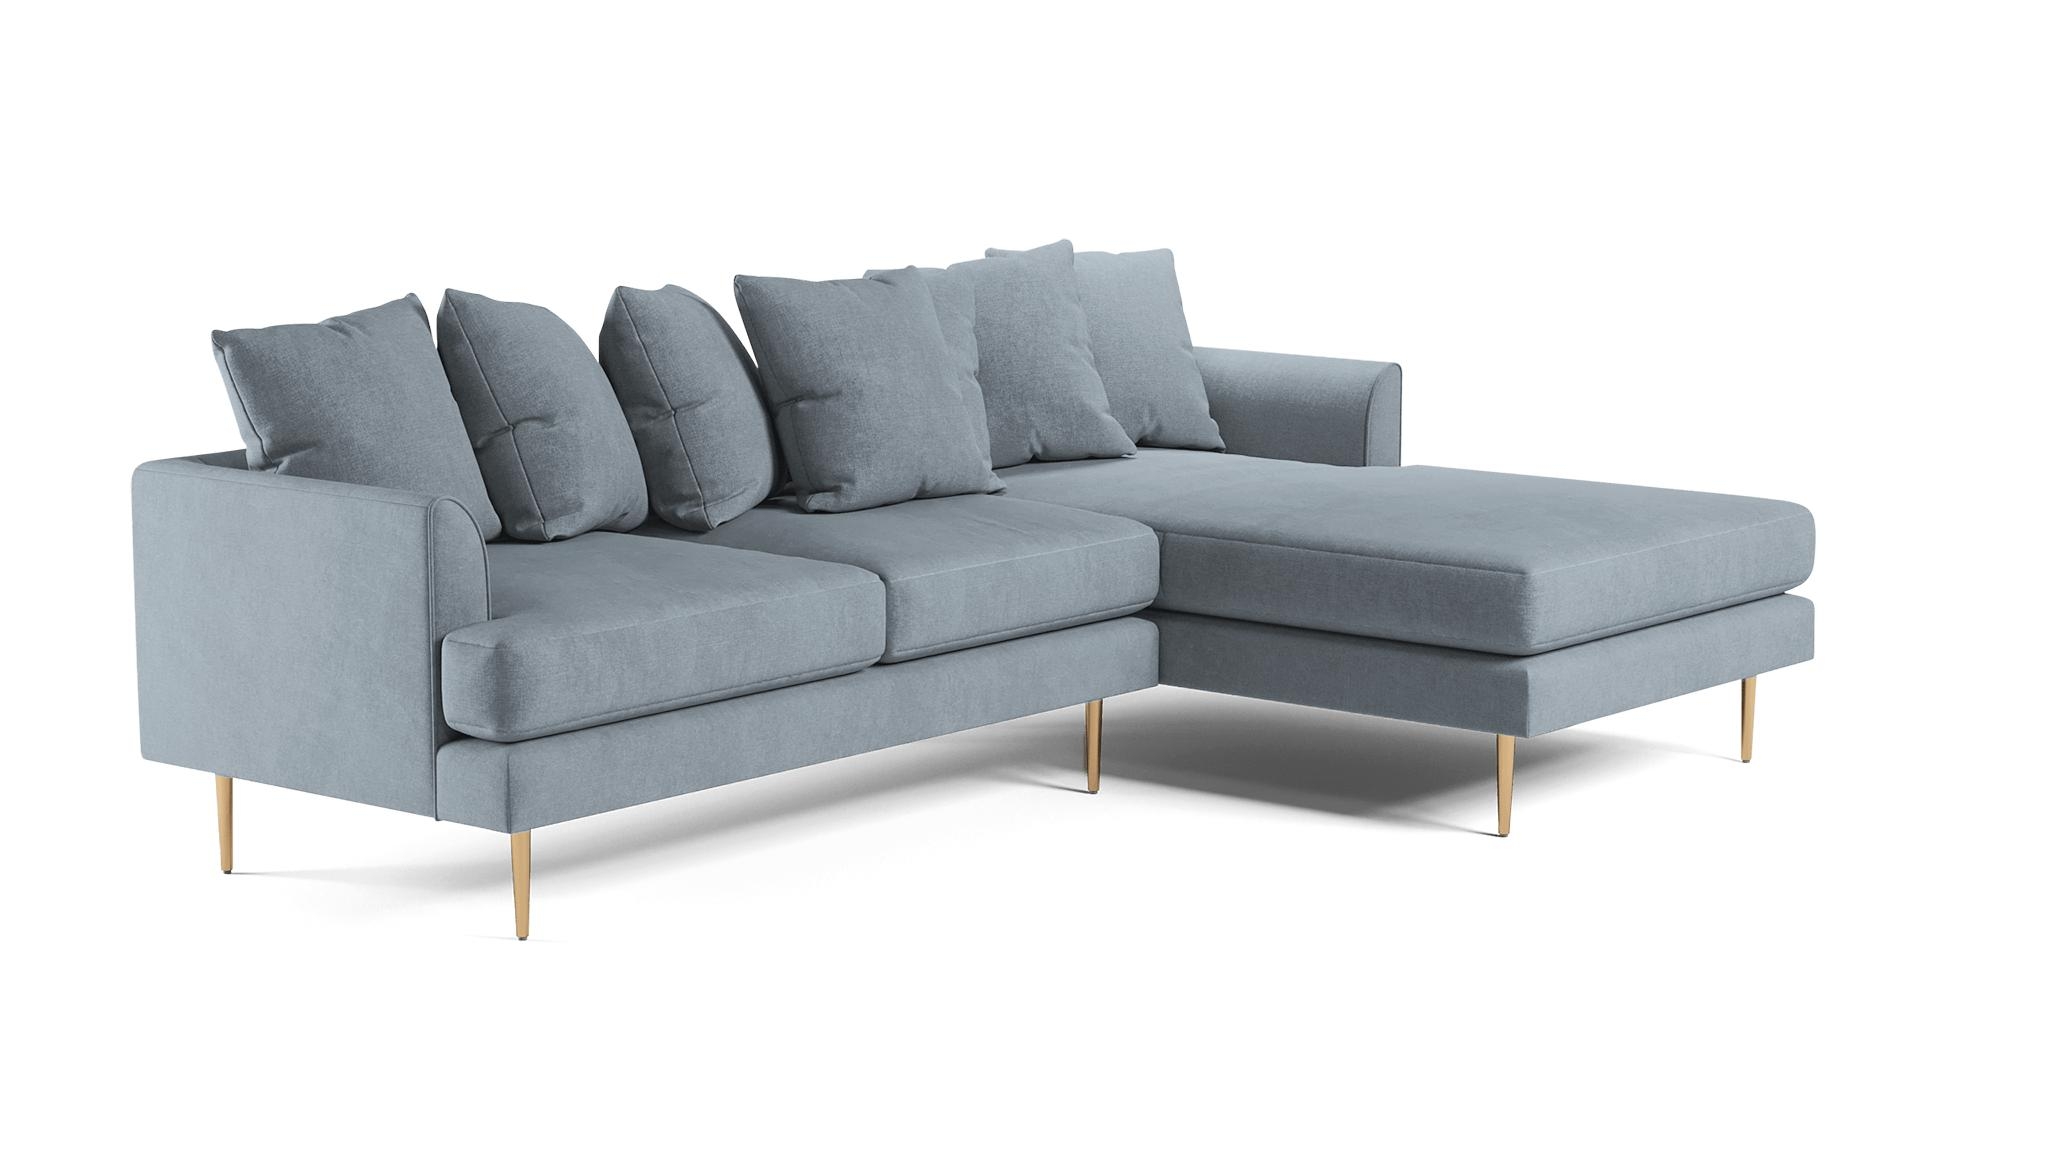 Gray Aime Mid Century Modern Sectional - Synergy Pewter - Left - Image 1